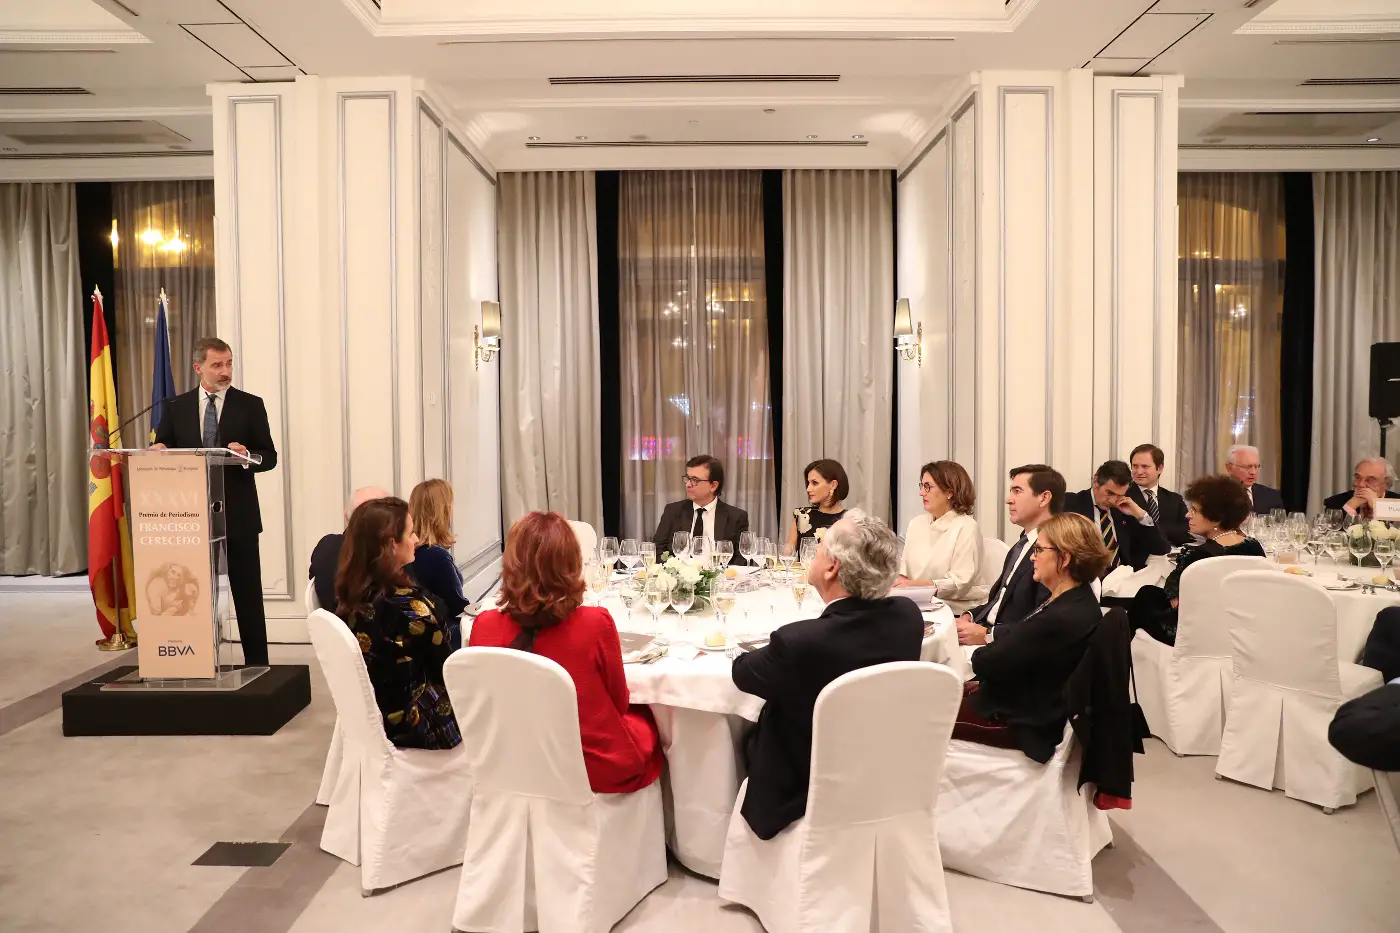 King Felipe and Queen Letizia attended the Francisco Cerecedo Journalism Awards